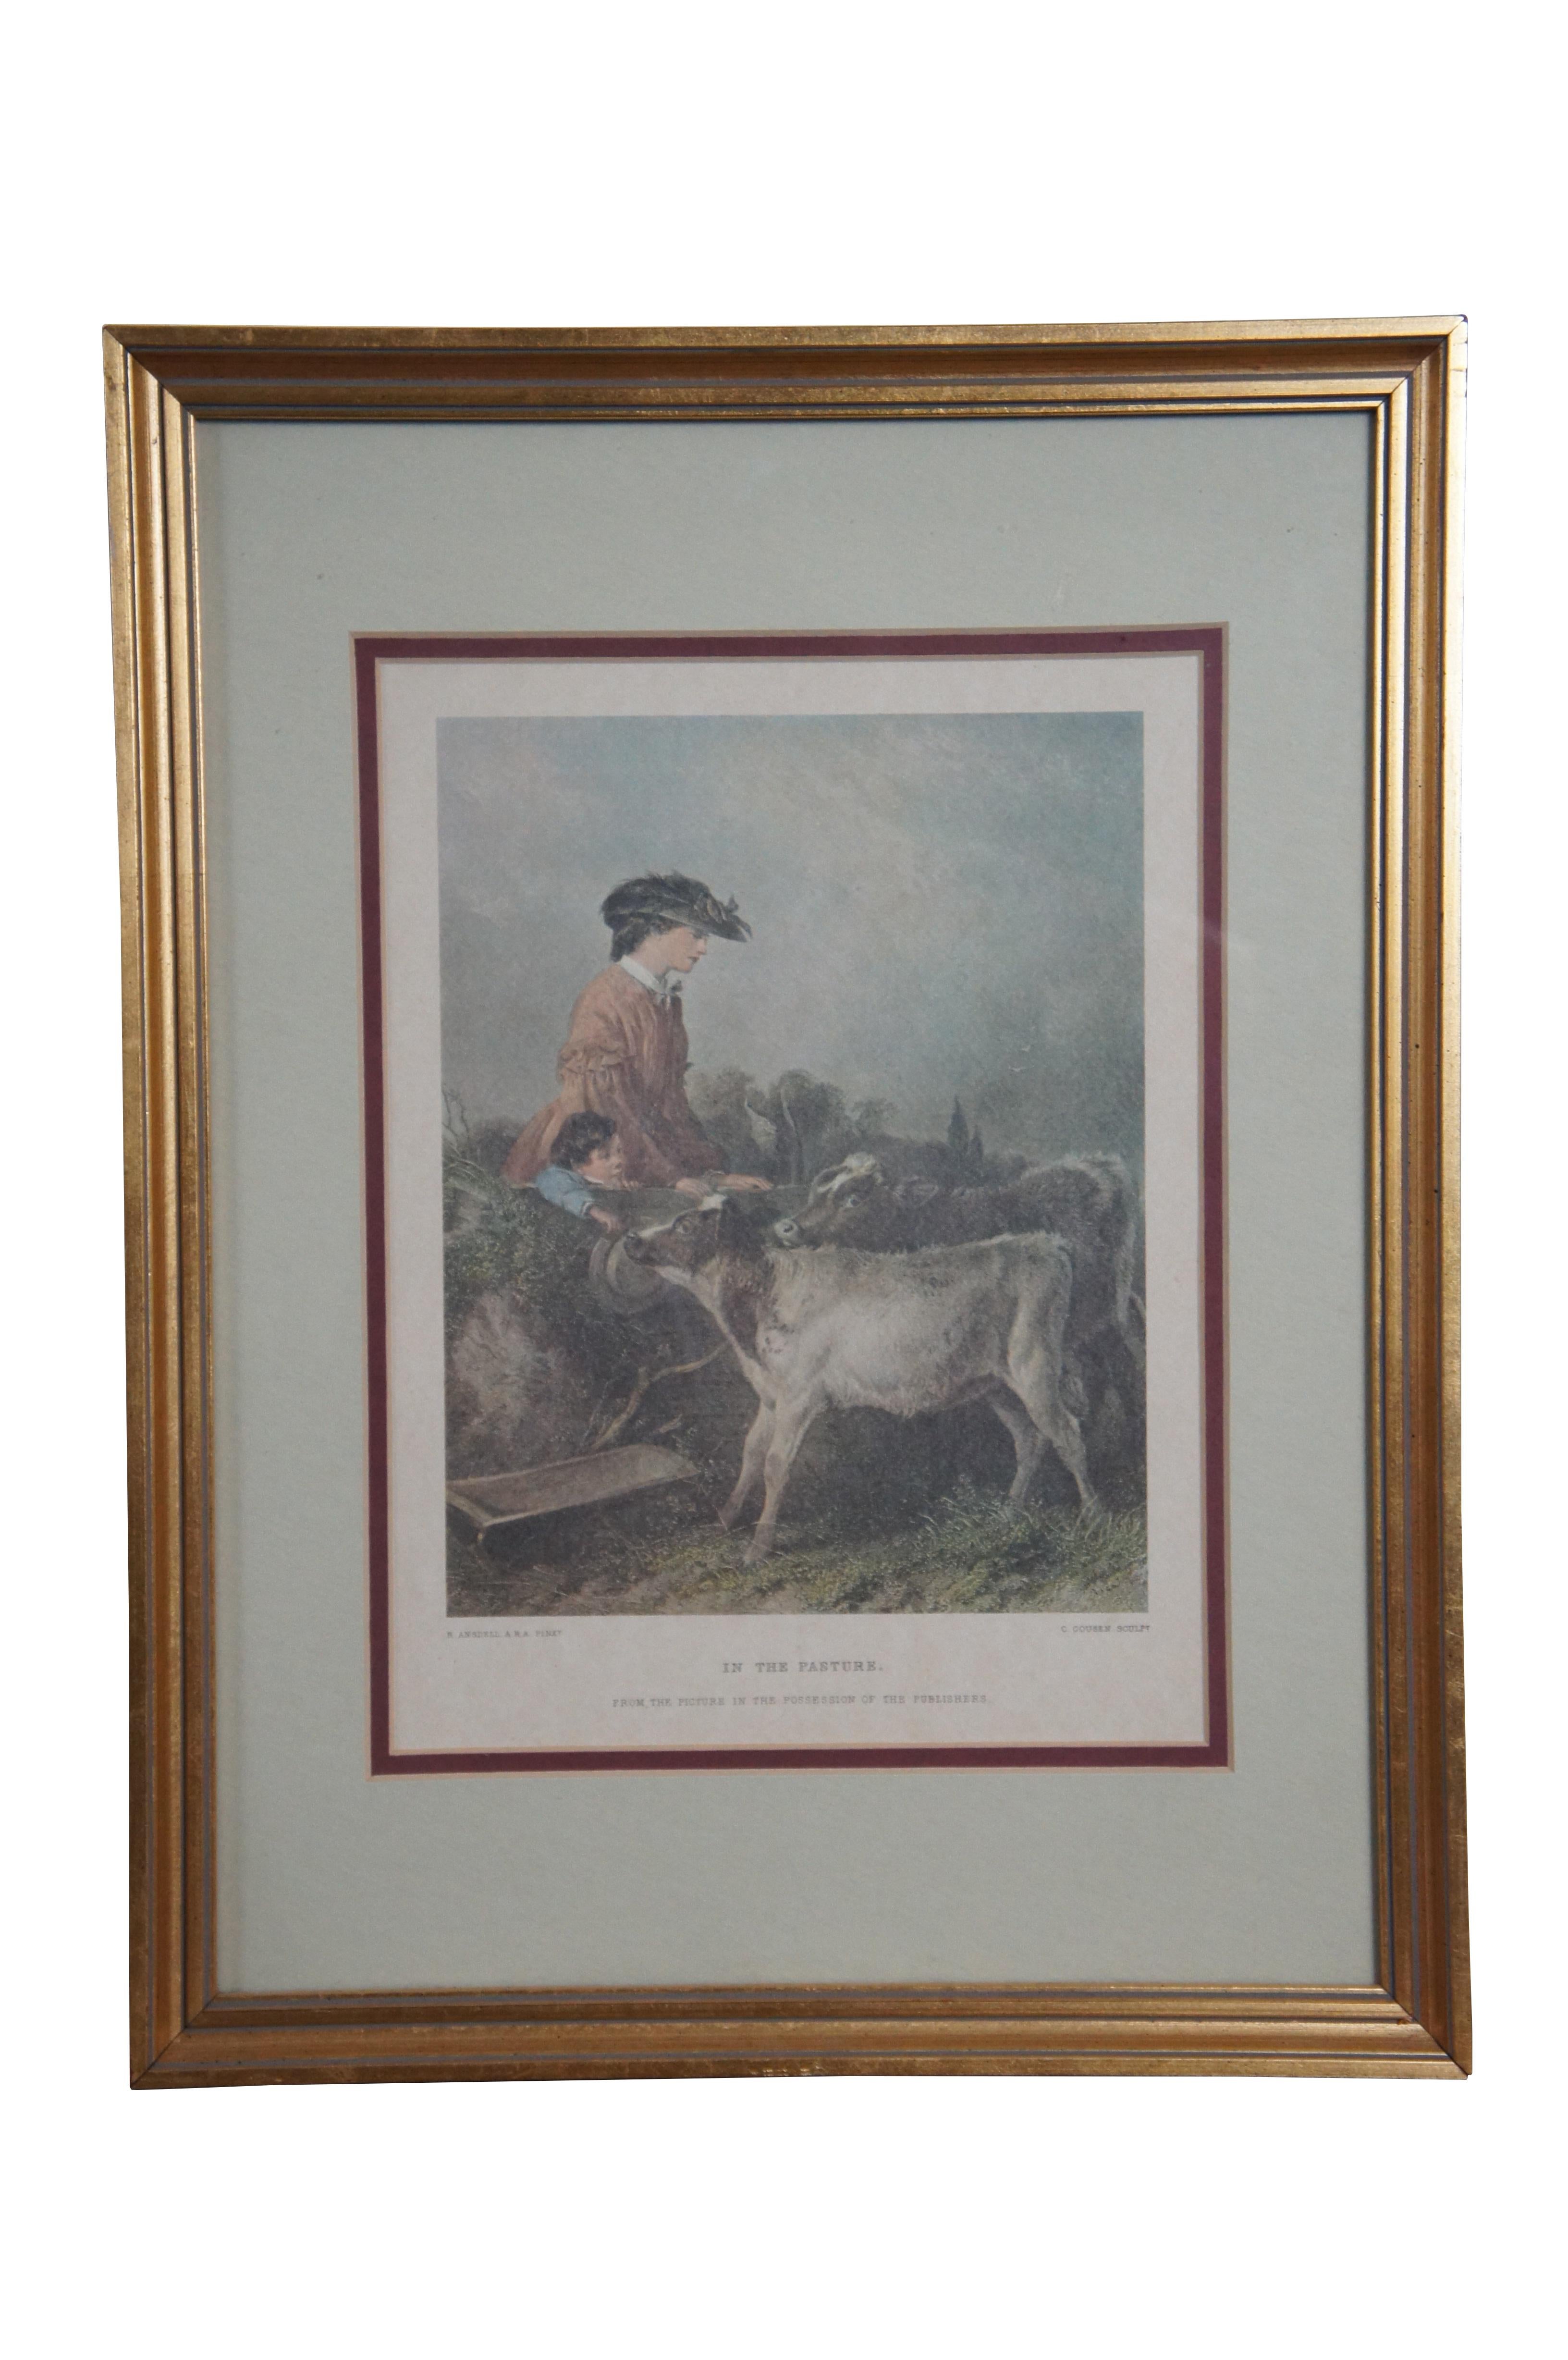 3 Vtg Pastoral Lithograph Prints Our Pets In the Pasture Eft Grafiche Tassotti In Good Condition For Sale In Dayton, OH